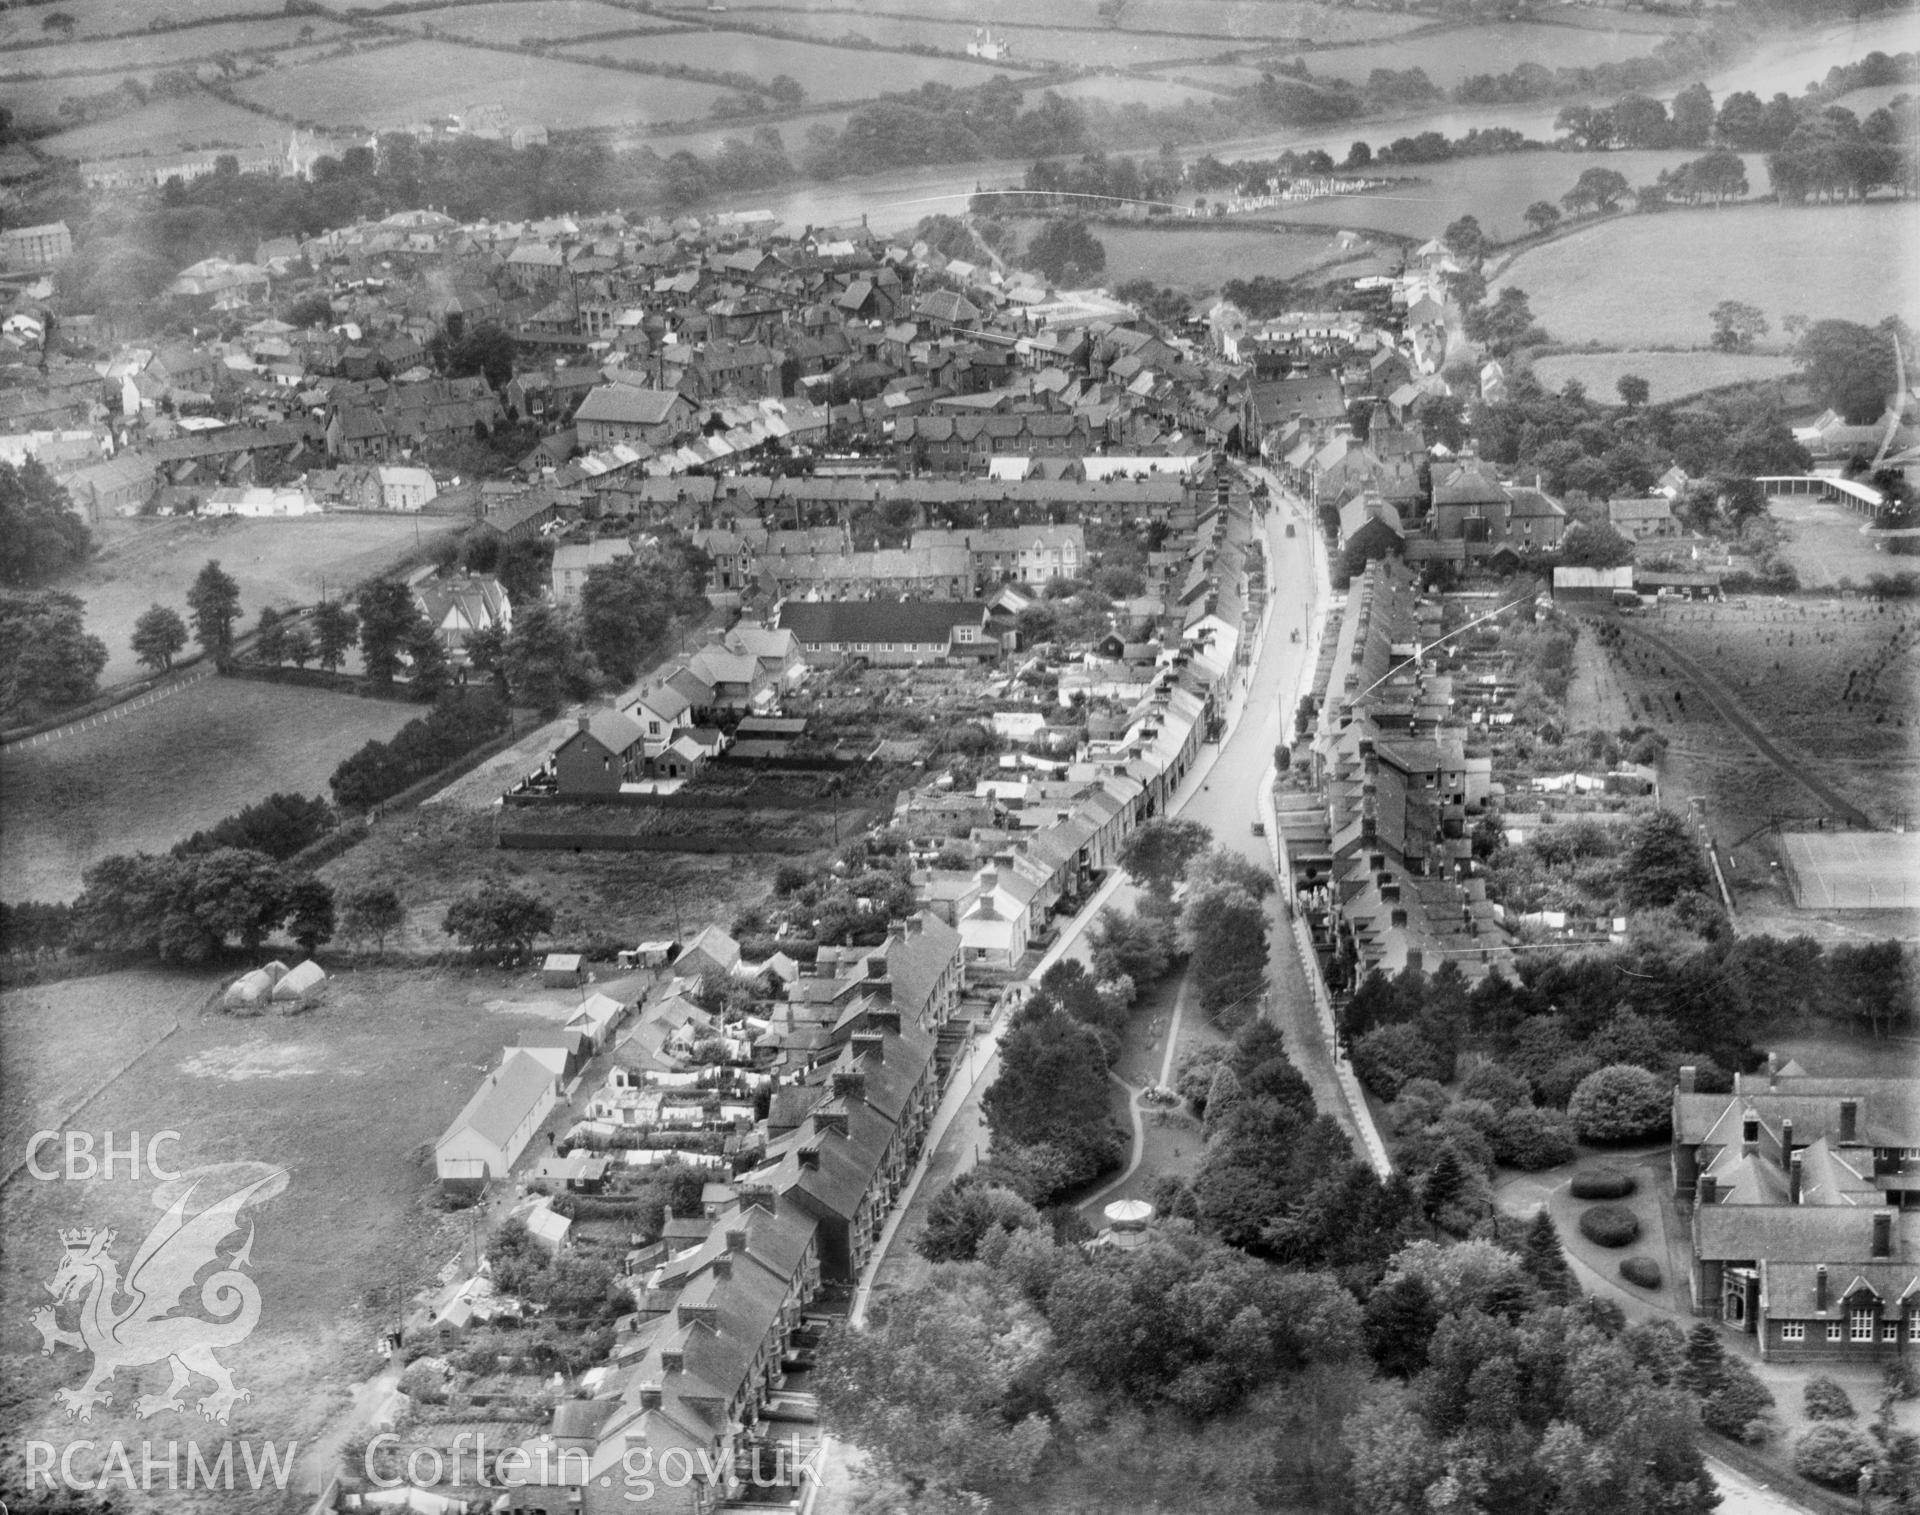 General view of Cardigan, oblique aerial view. 5?x4? black and white glass plate negative.